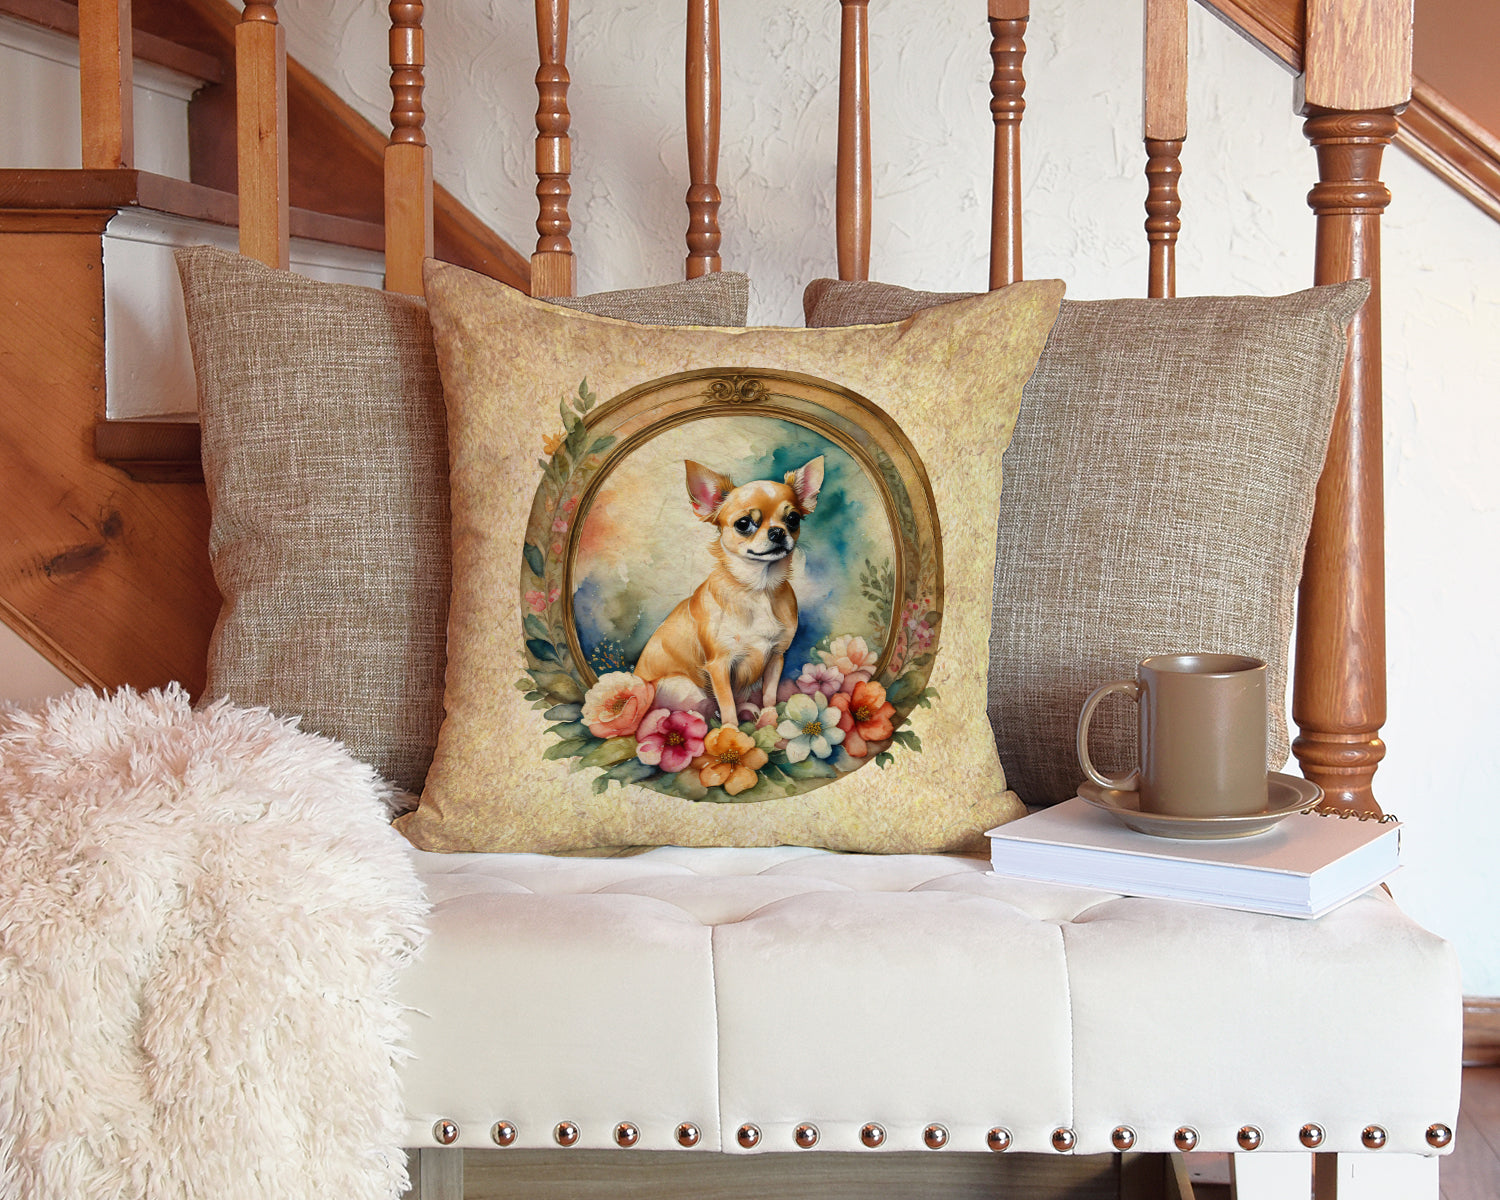 Chihuahua and Flowers Fabric Decorative Pillow